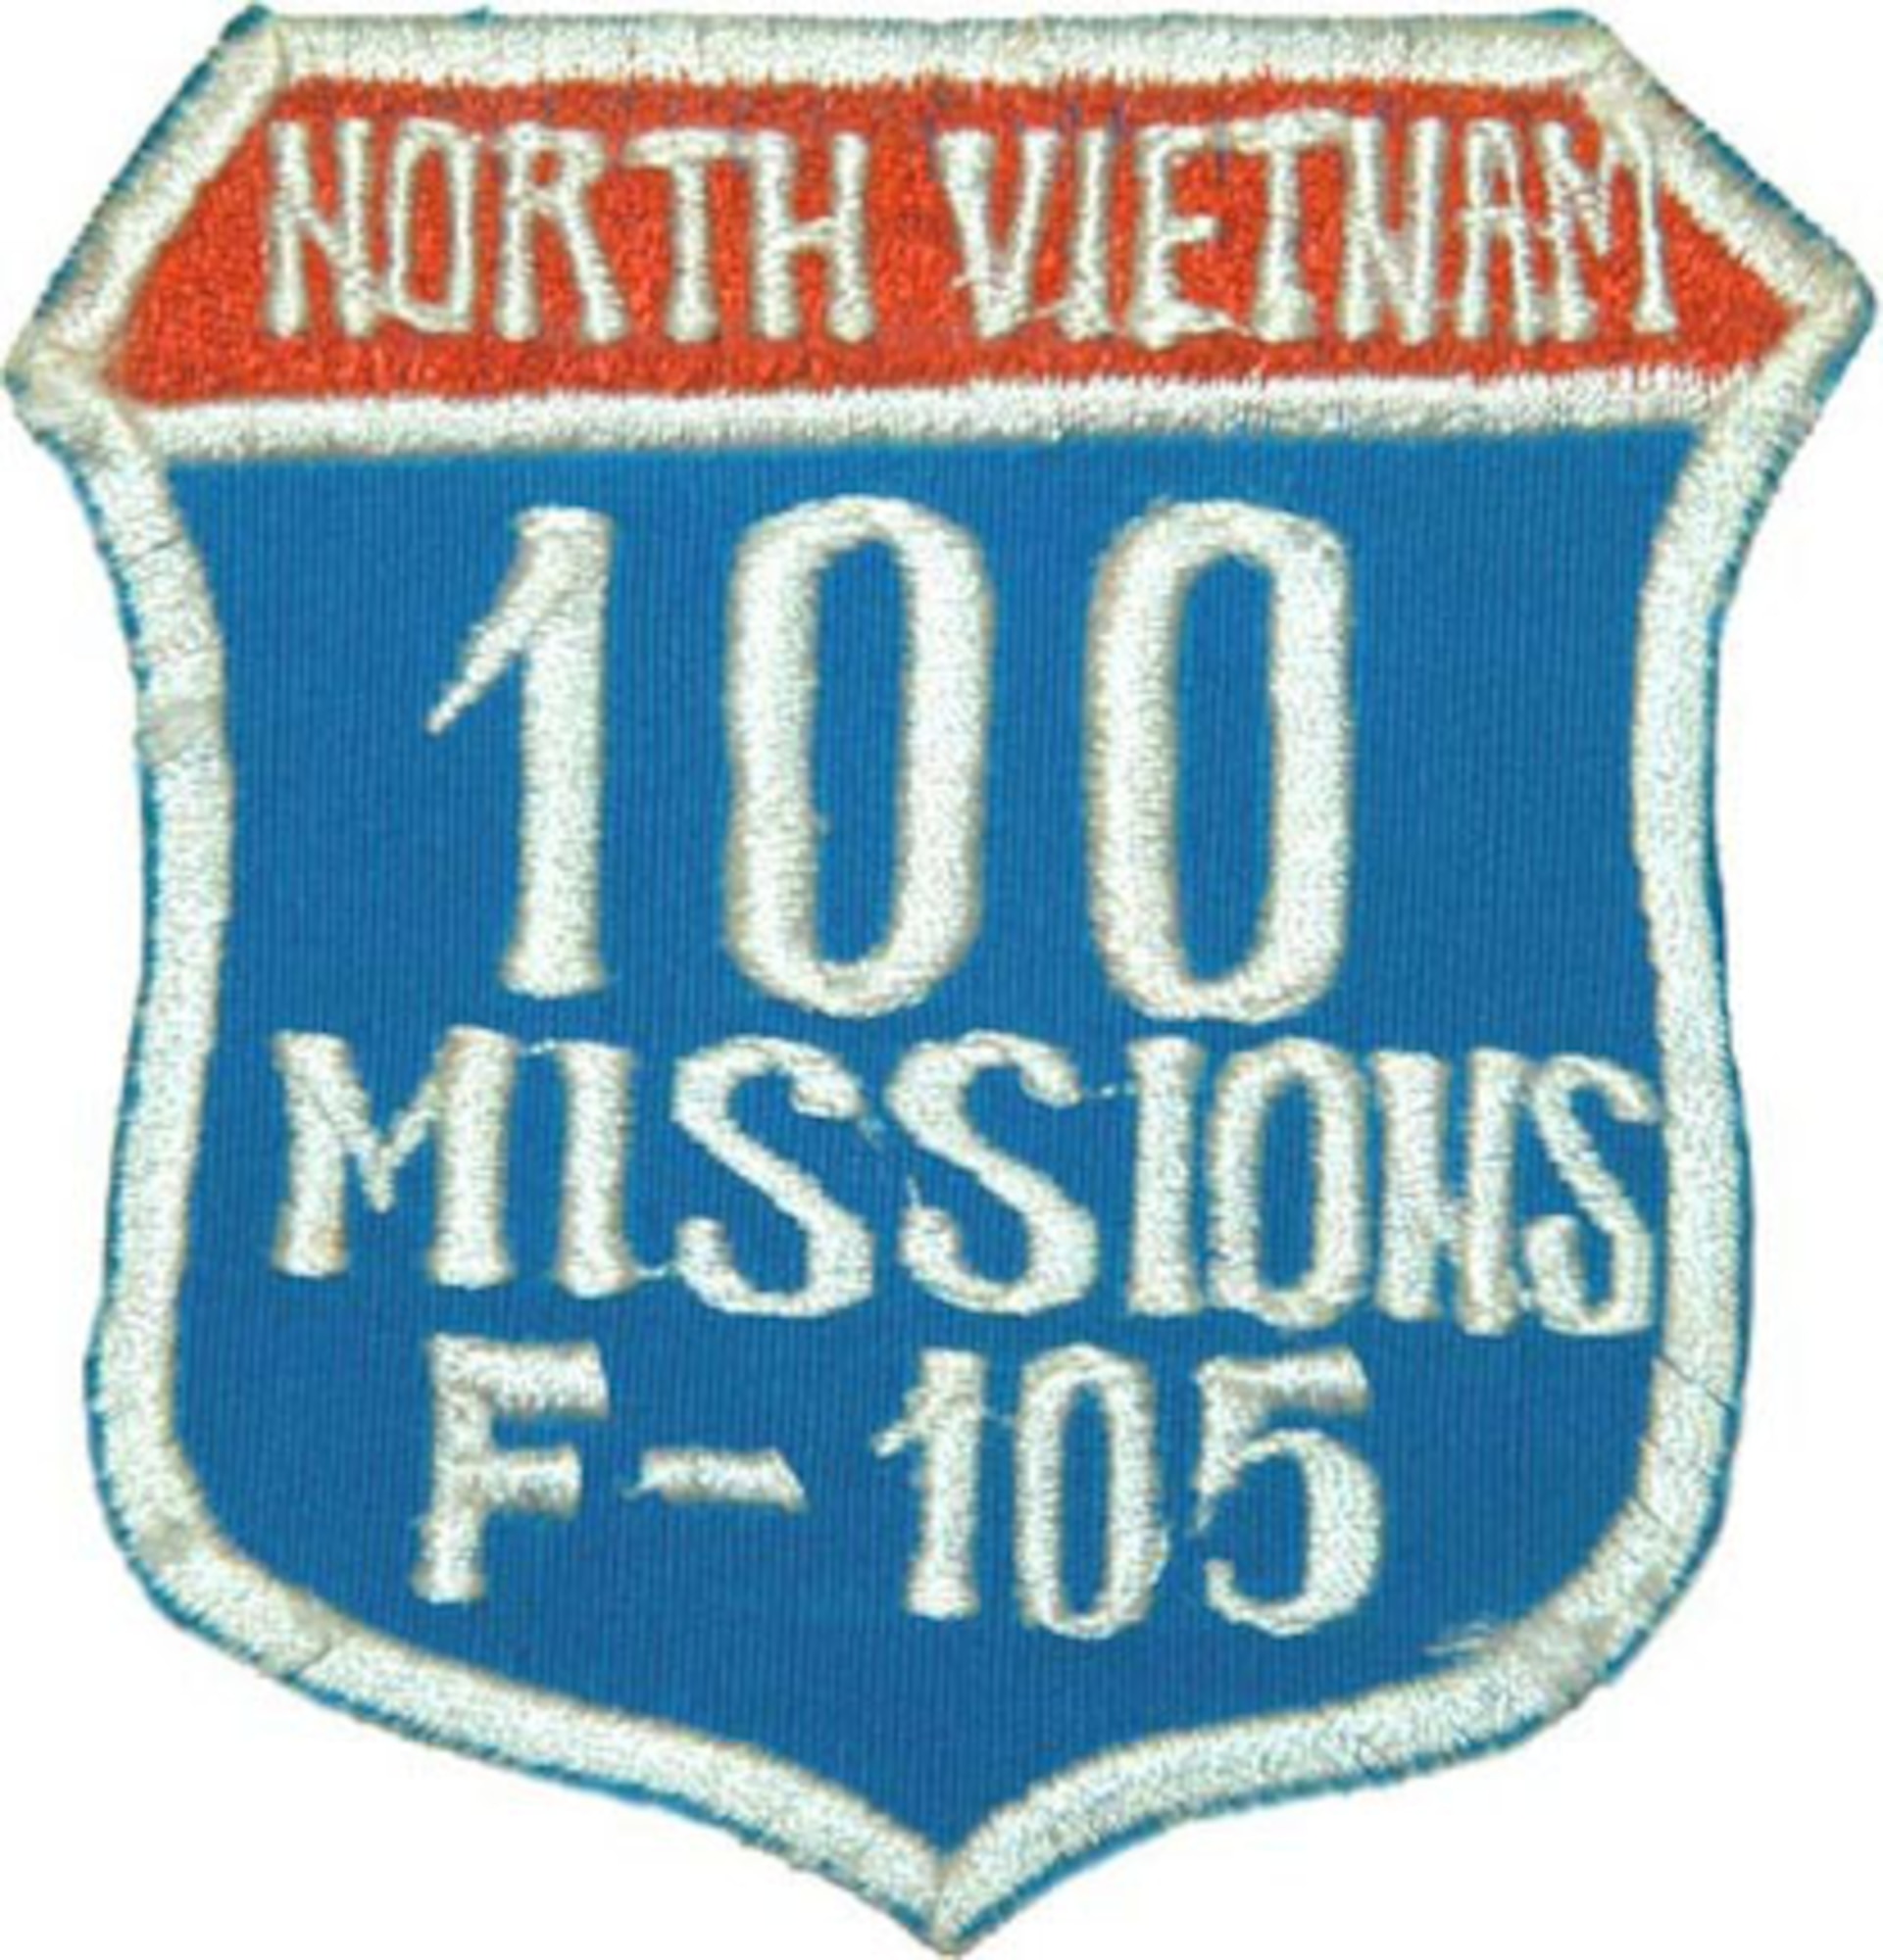 The 100 Missions North Vietnam patch. (U.S. Air Force photo)